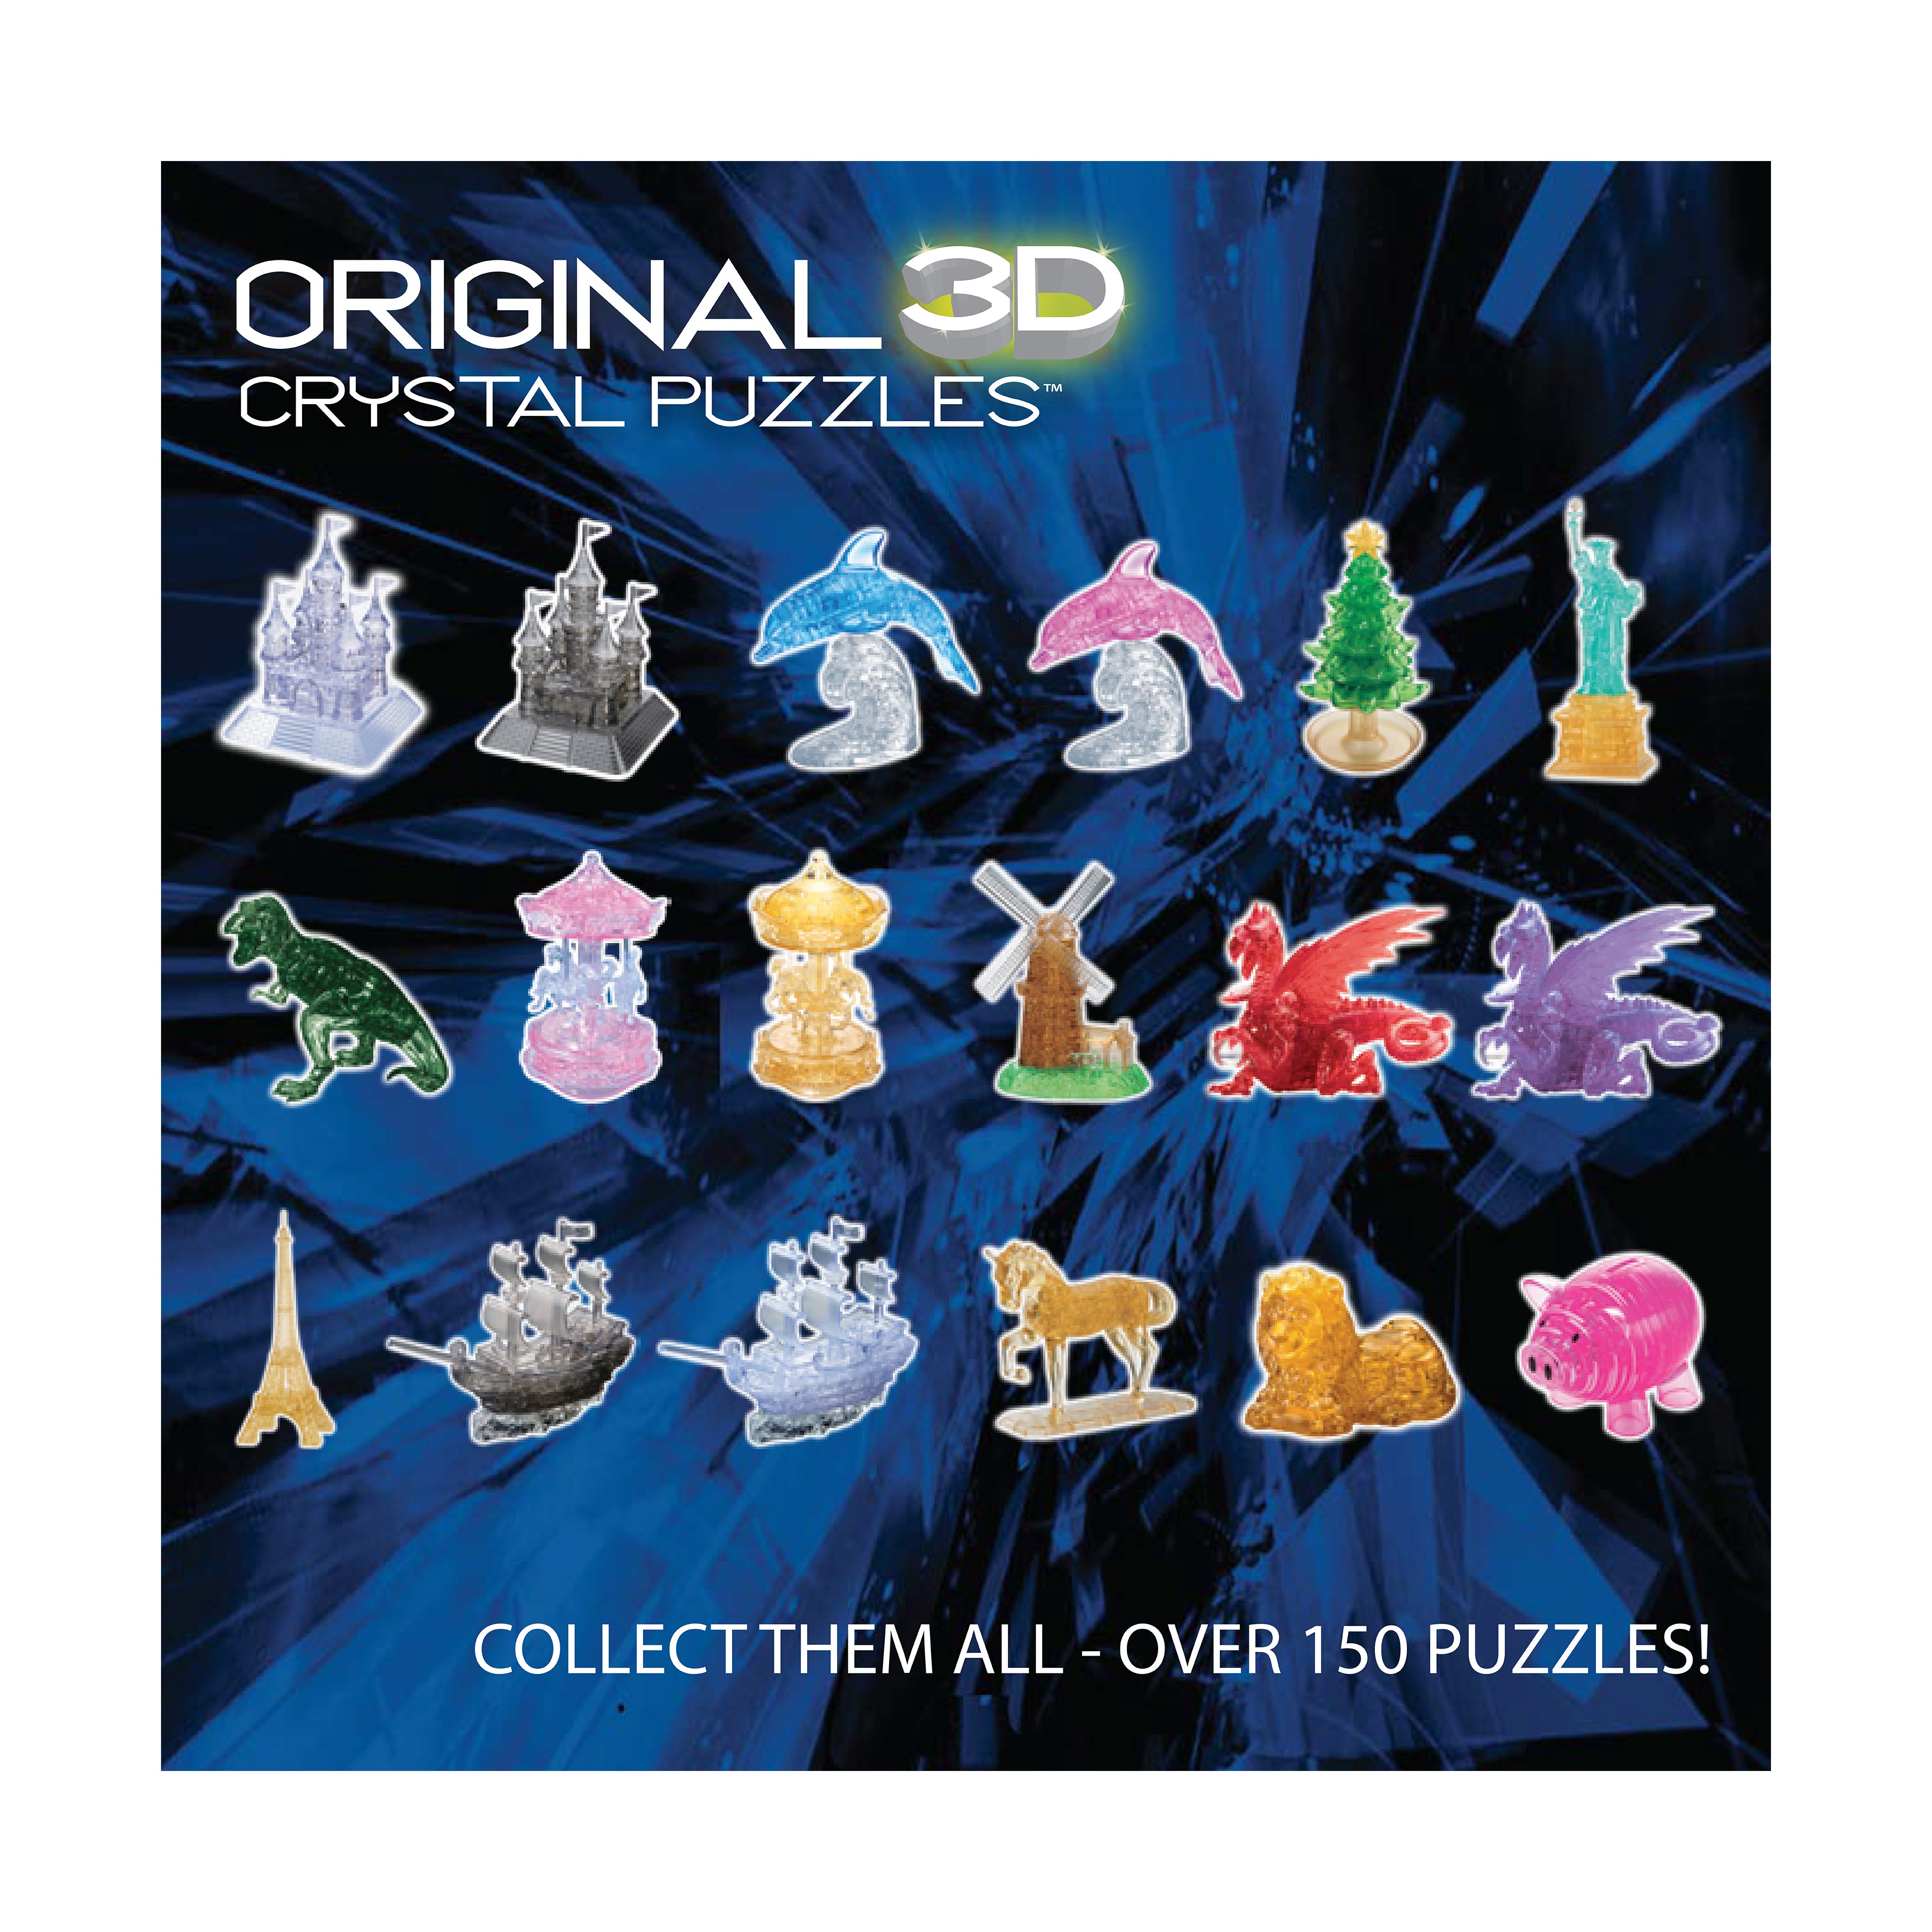 Review: Disney 3D Crystal Puzzles Provide Perfect Challenge For New and  Experienced Builders